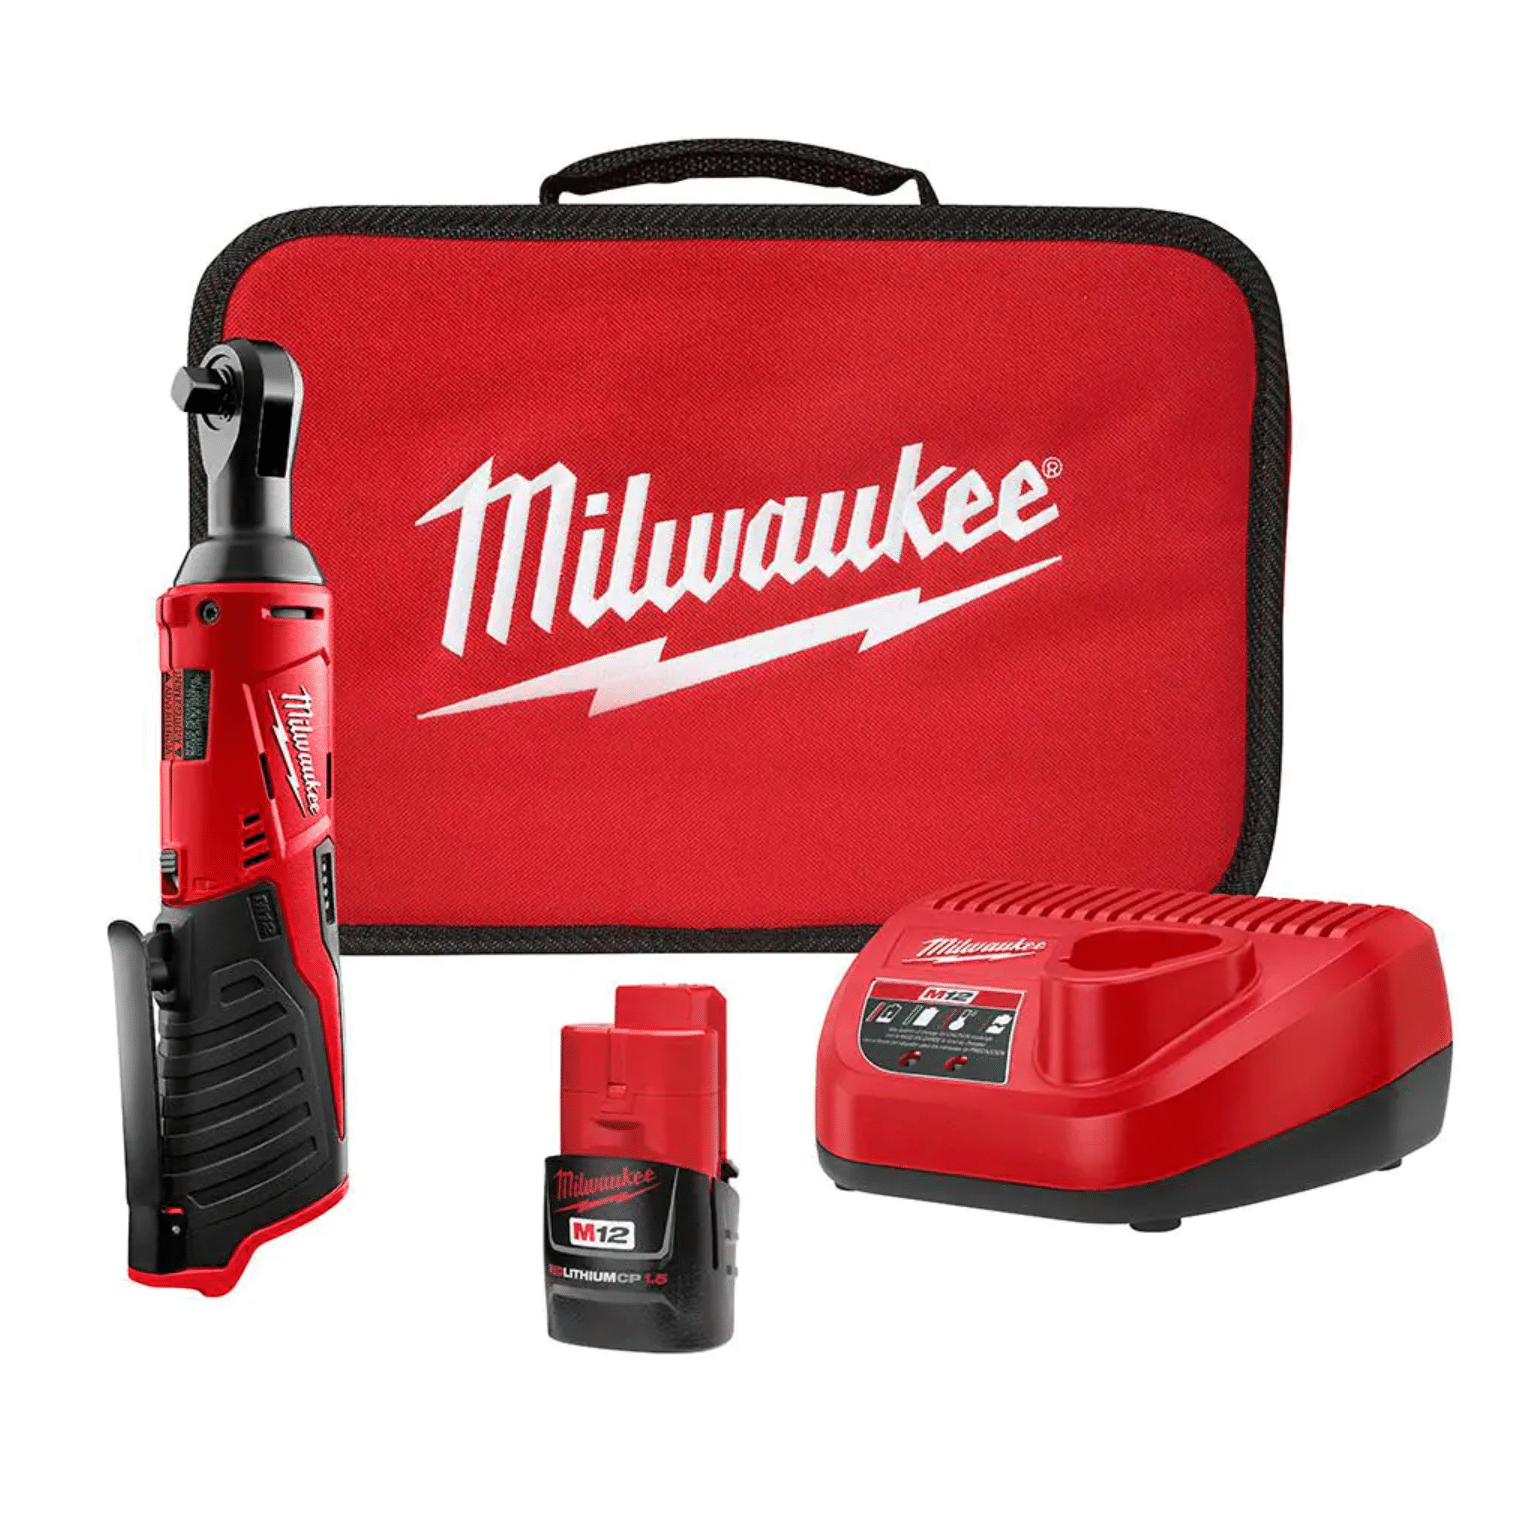 Milwaukee M12 12-Volt Lithium-Ion Cordless 3/8 in. Ratchet Kit with One 1.5 Ah Battery, Charger & Tool Bag (2457-21)